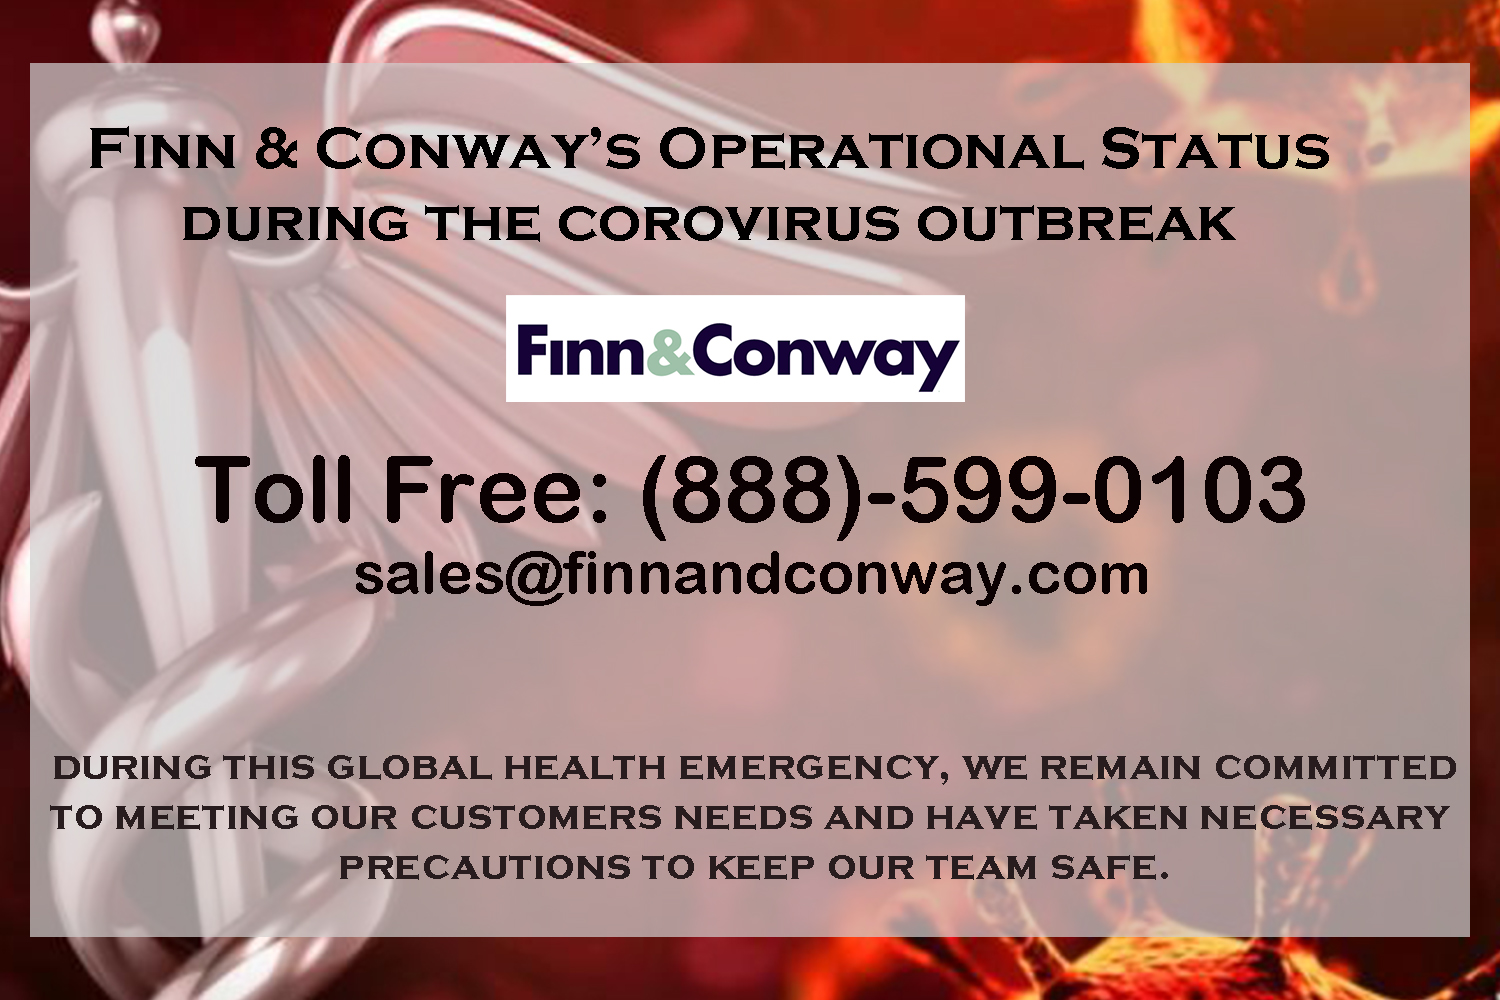 Finn & Conway Operations During COVID-19 Outbreak